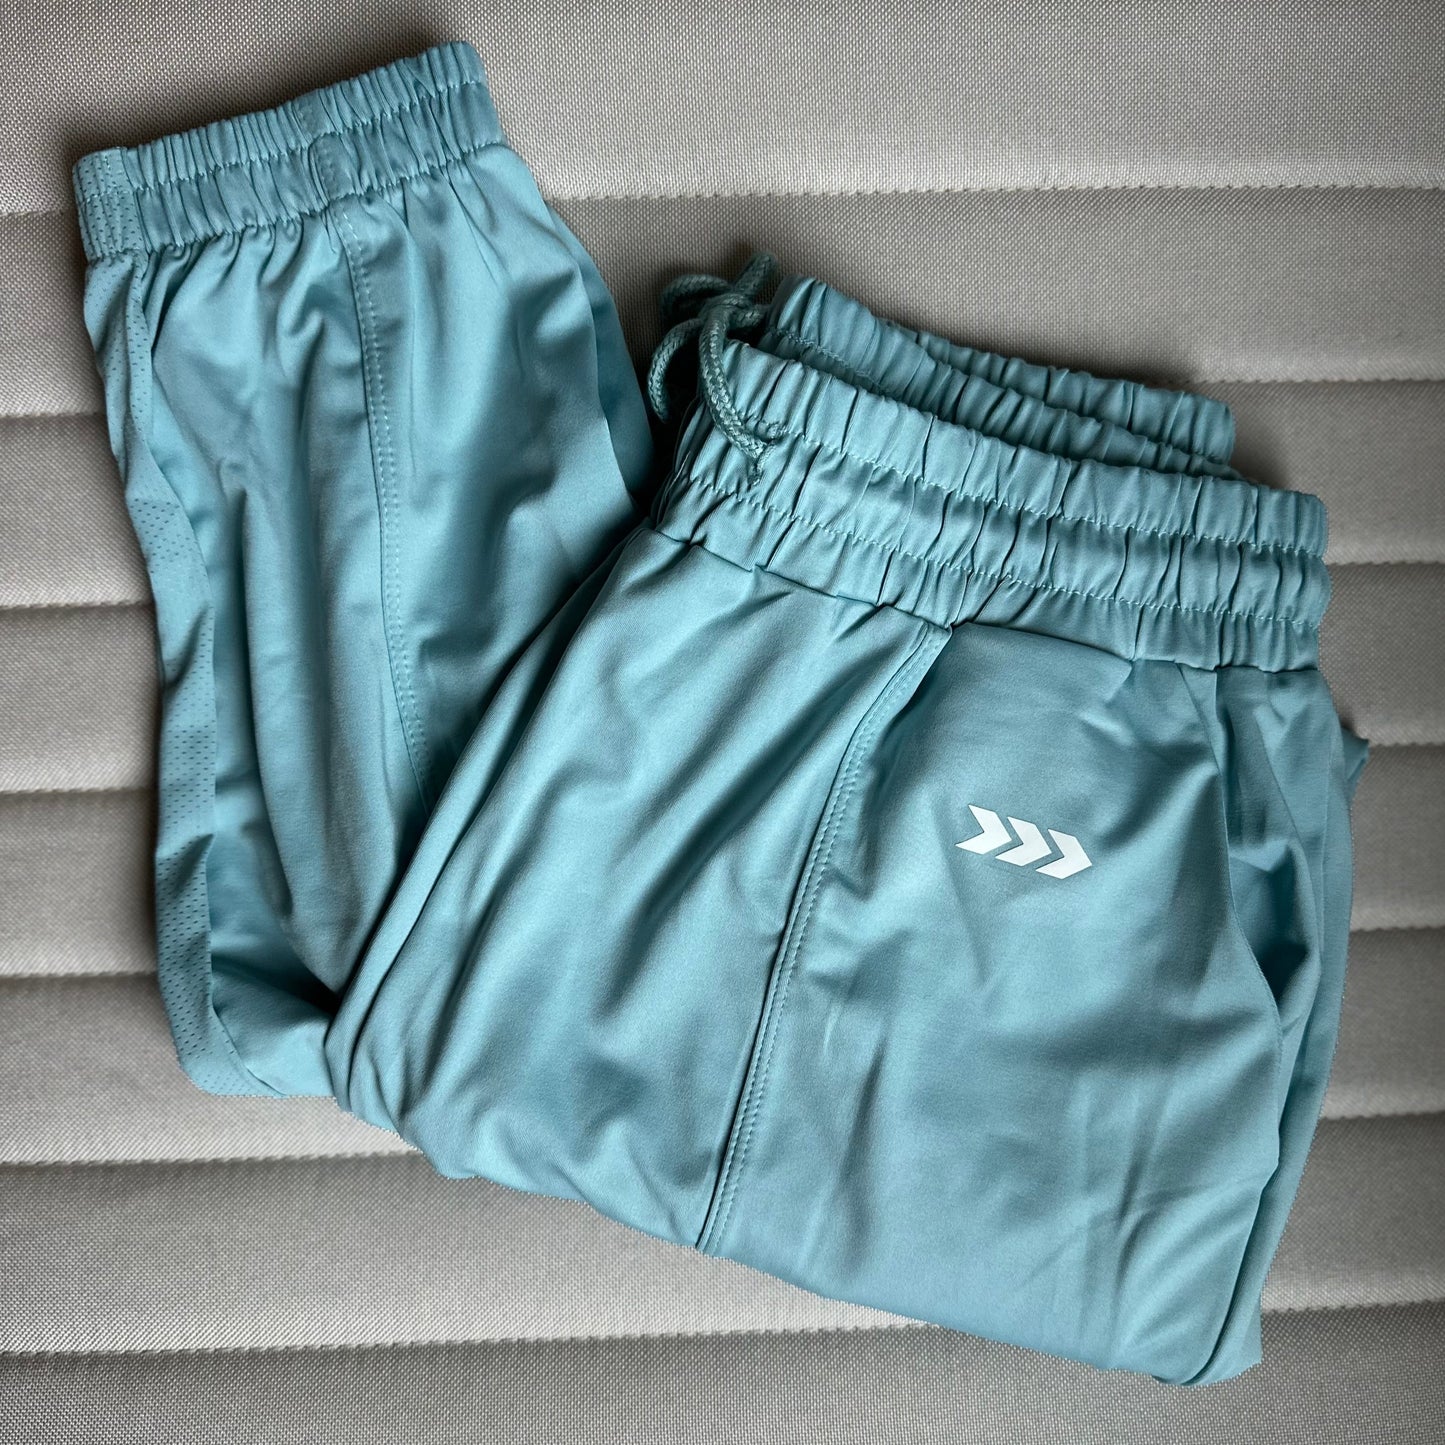 SPRING INTO ACTION JOGGERS